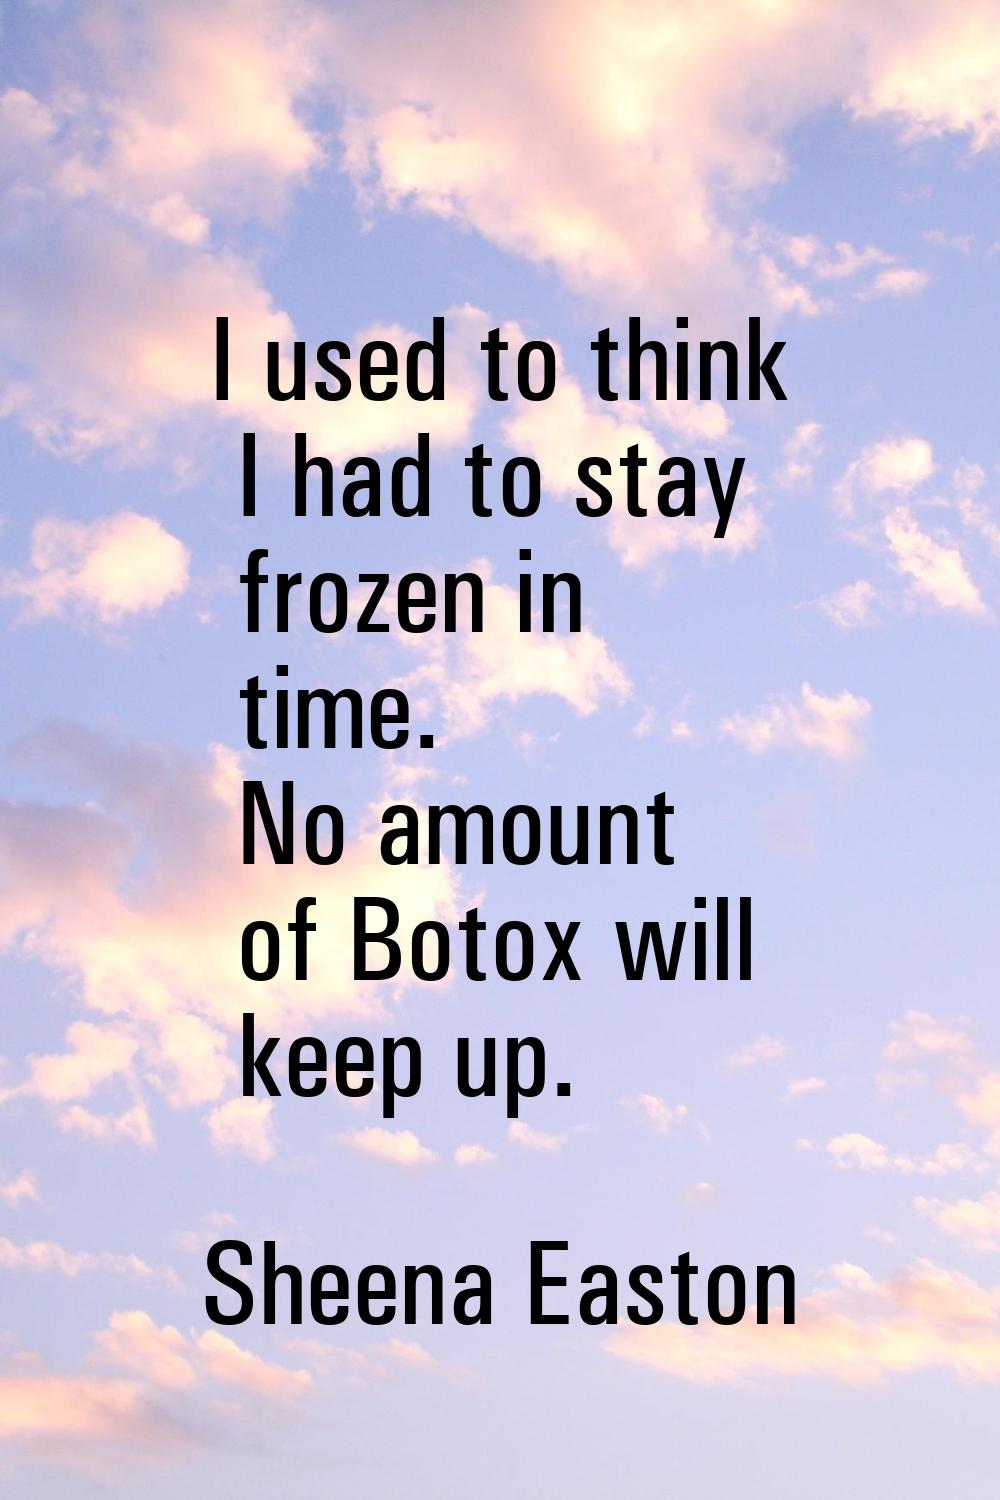 I used to think I had to stay frozen in time. No amount of Botox will keep up.